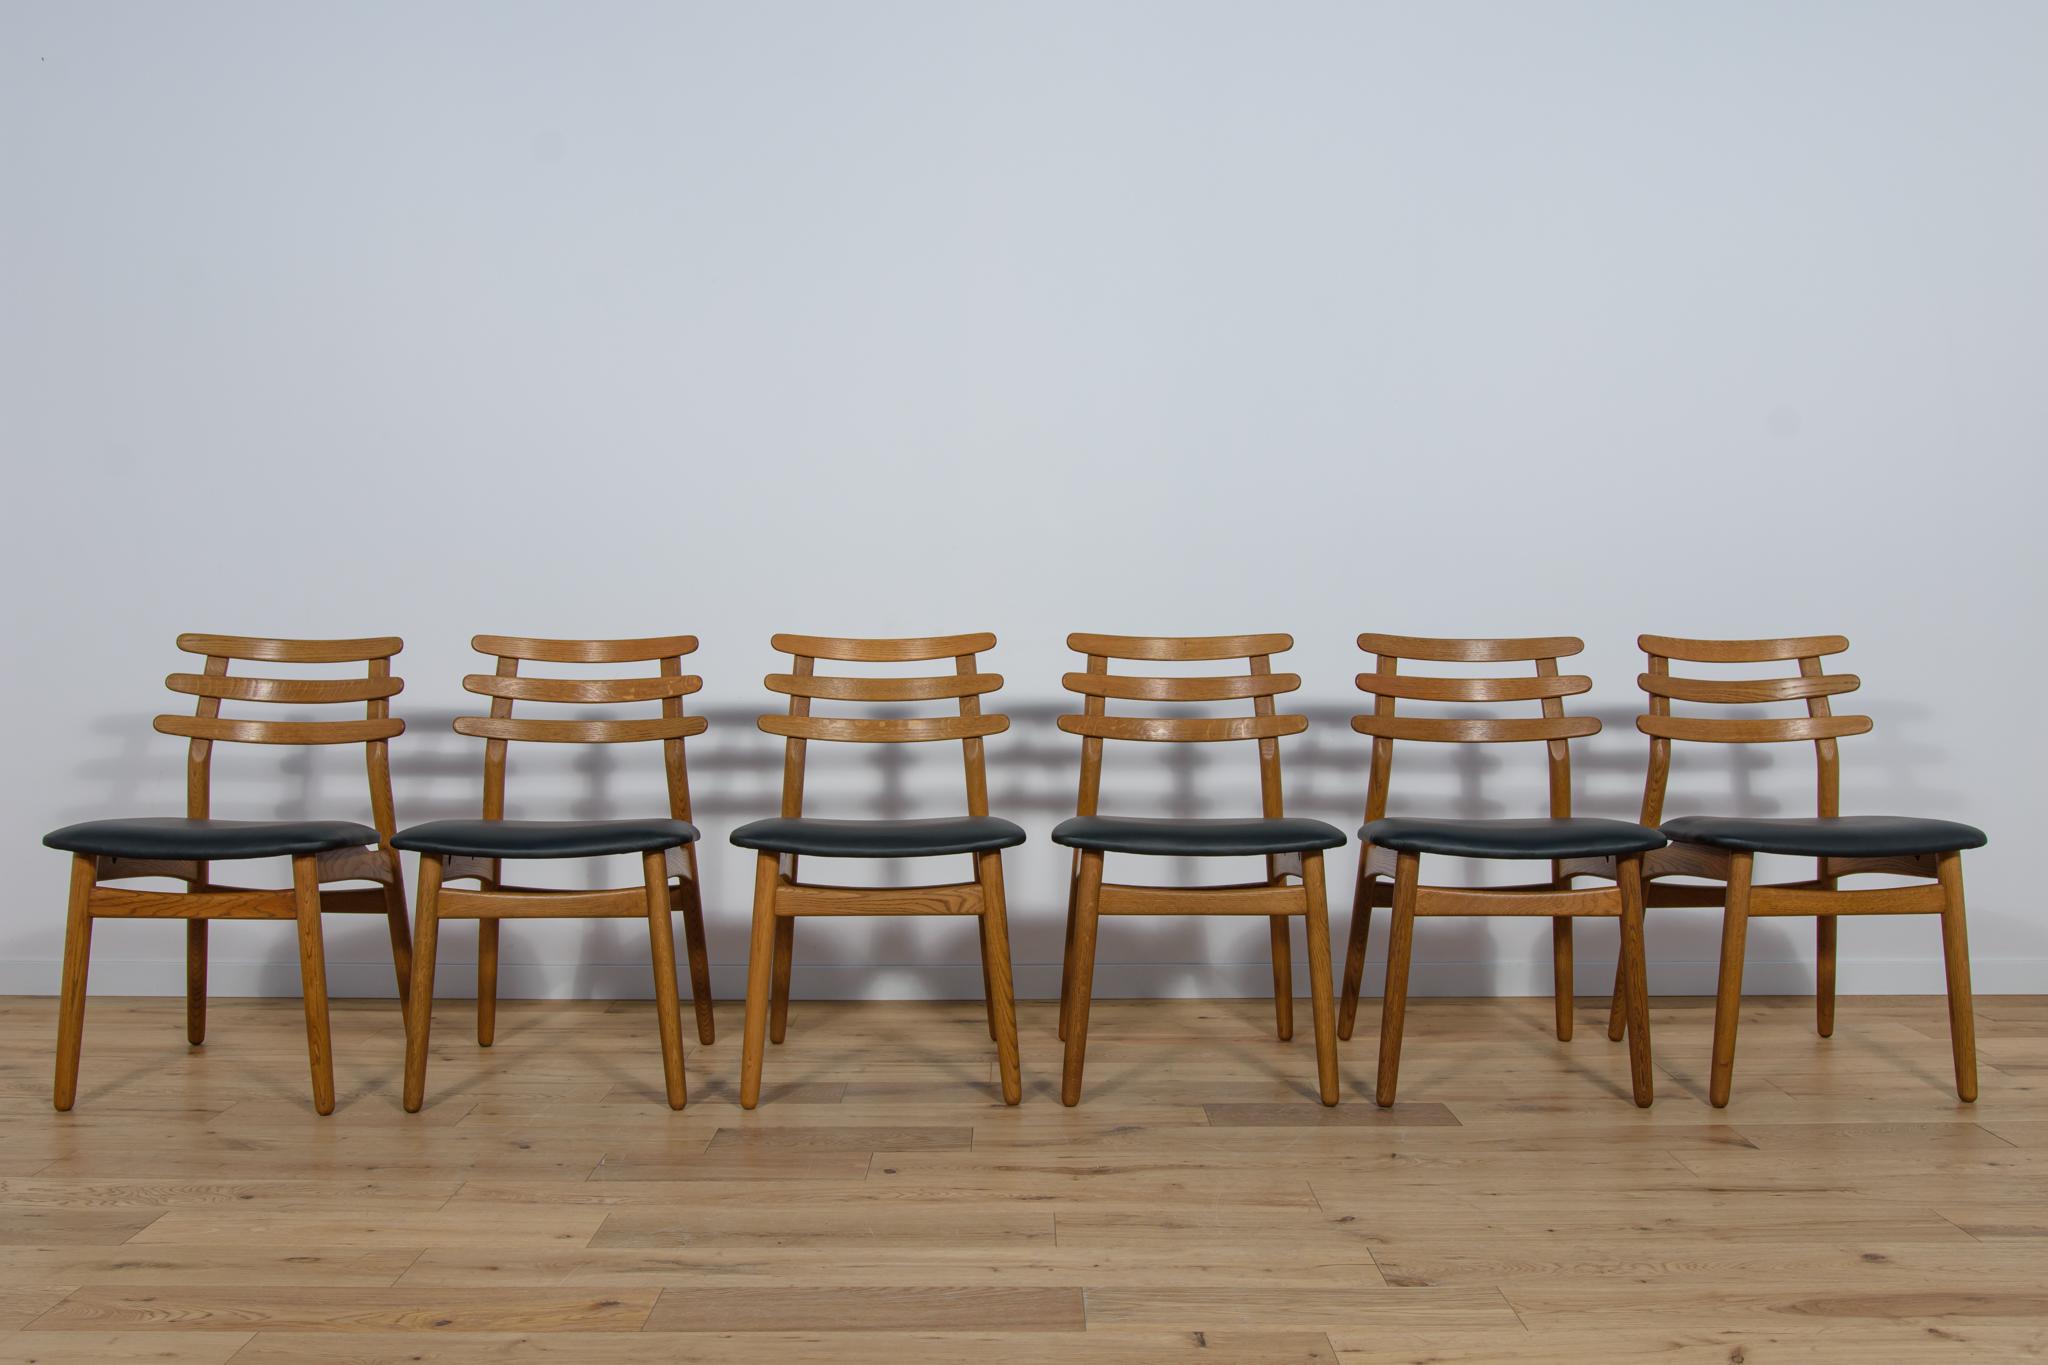 A set of four chairs designed by Poul Volther for the Danish factory FDB Mobler in the 1960s. The chairs have undergone professional carpentry and upholstery renovation. Chair frames made of oak wood have been cleaned of the old surface and finished